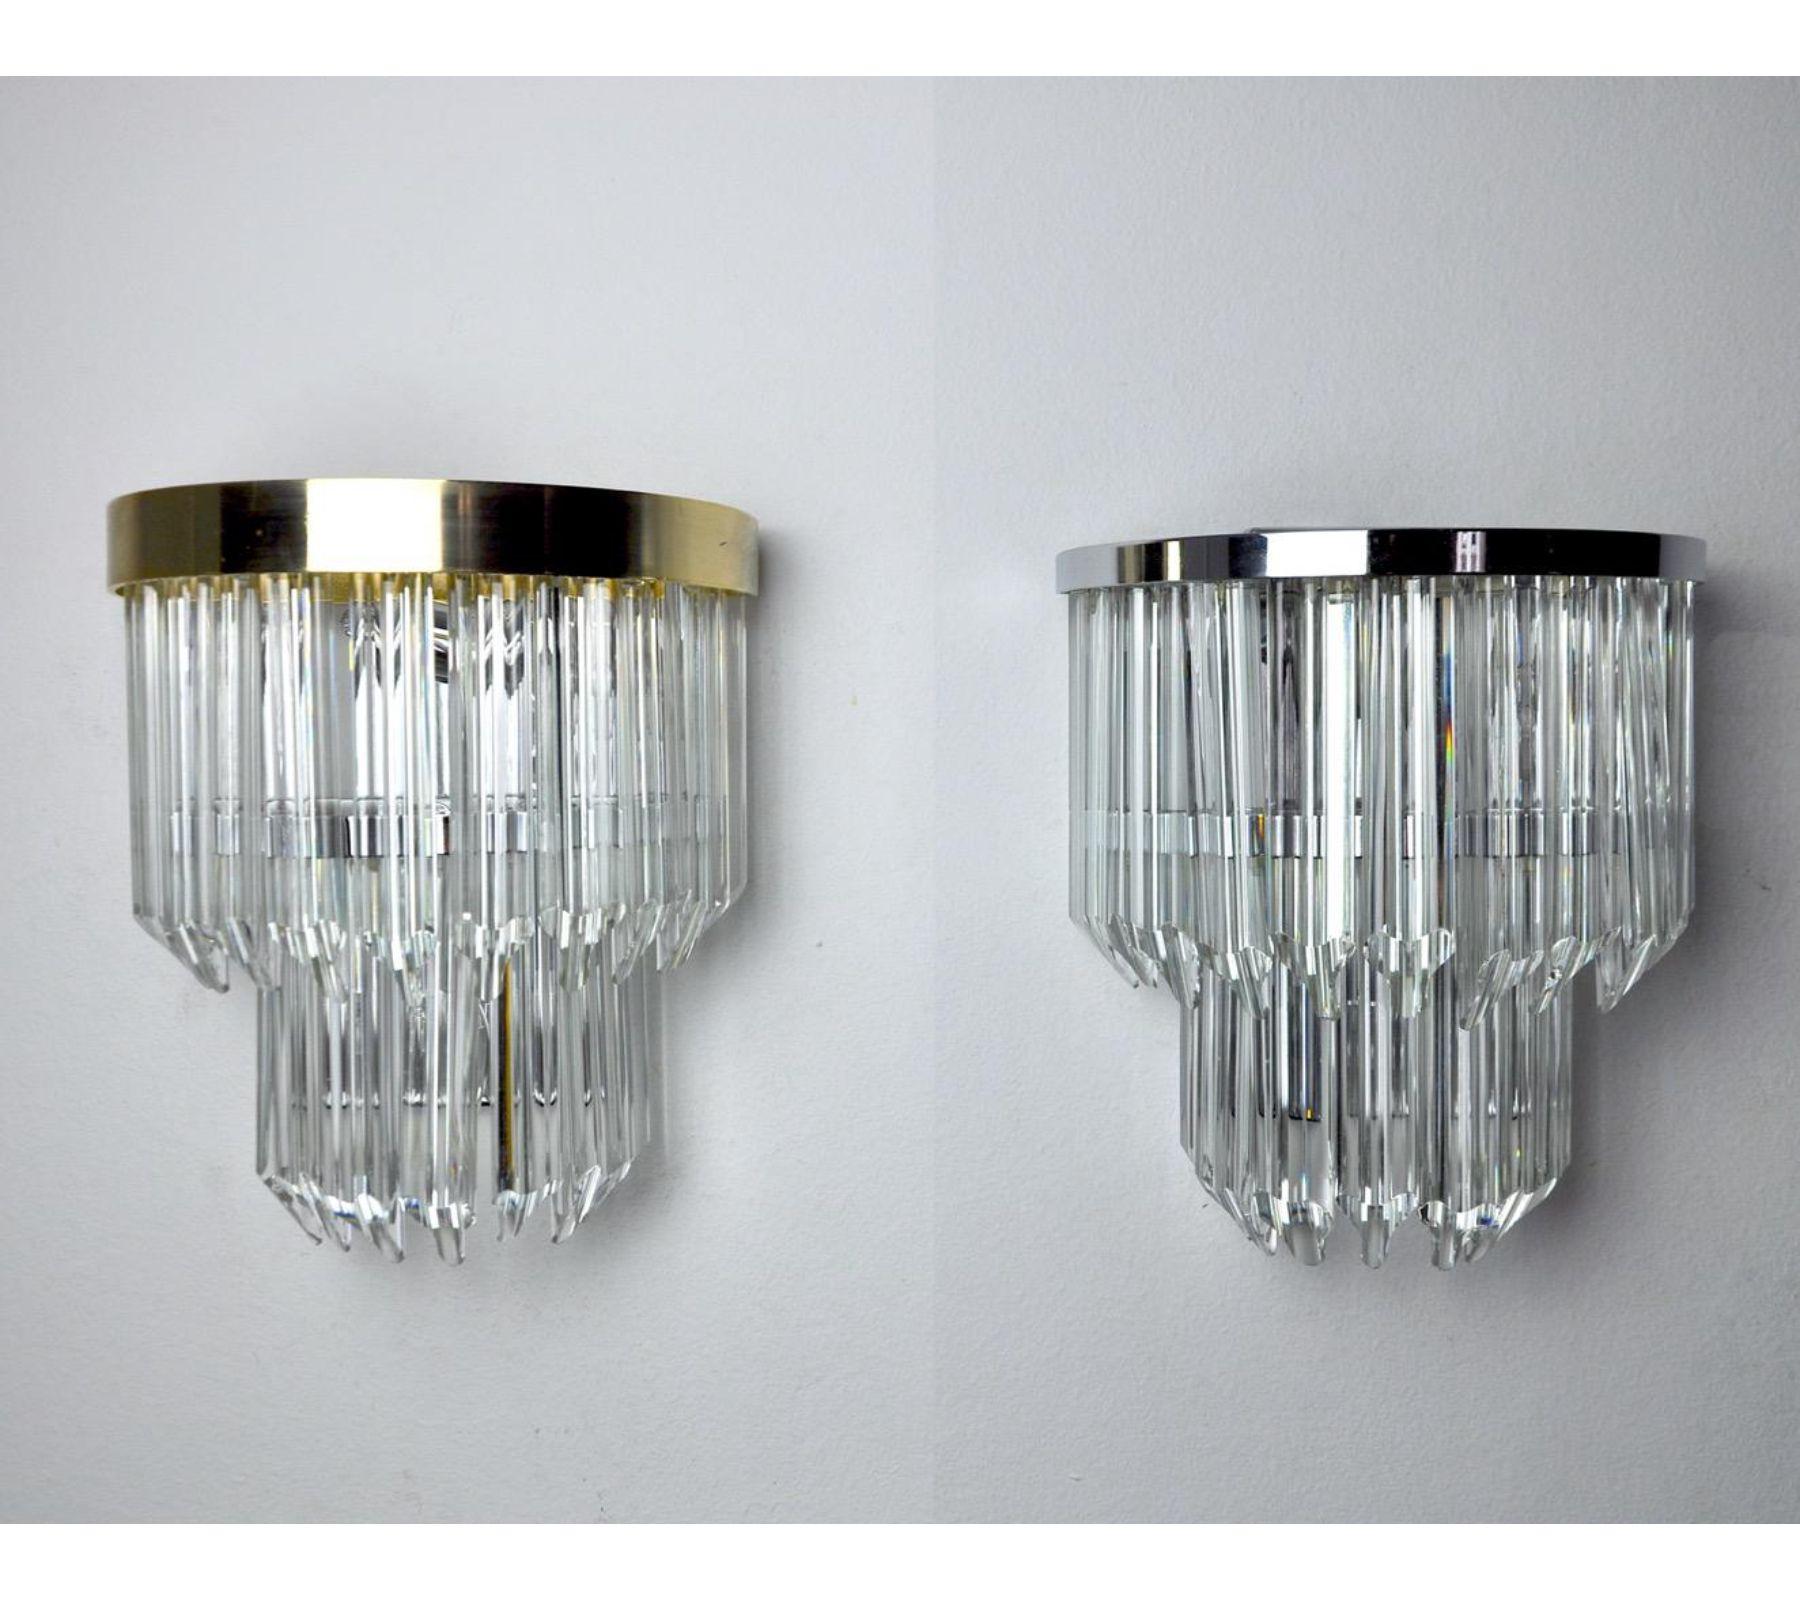 Very beautiful duo of appliques produced in Italy in the 70s. Cut glass and two separate structures, one in gilded metal and chrome-plated. Unique design object that will illuminate perfectly and bring a real design touch to your interior.